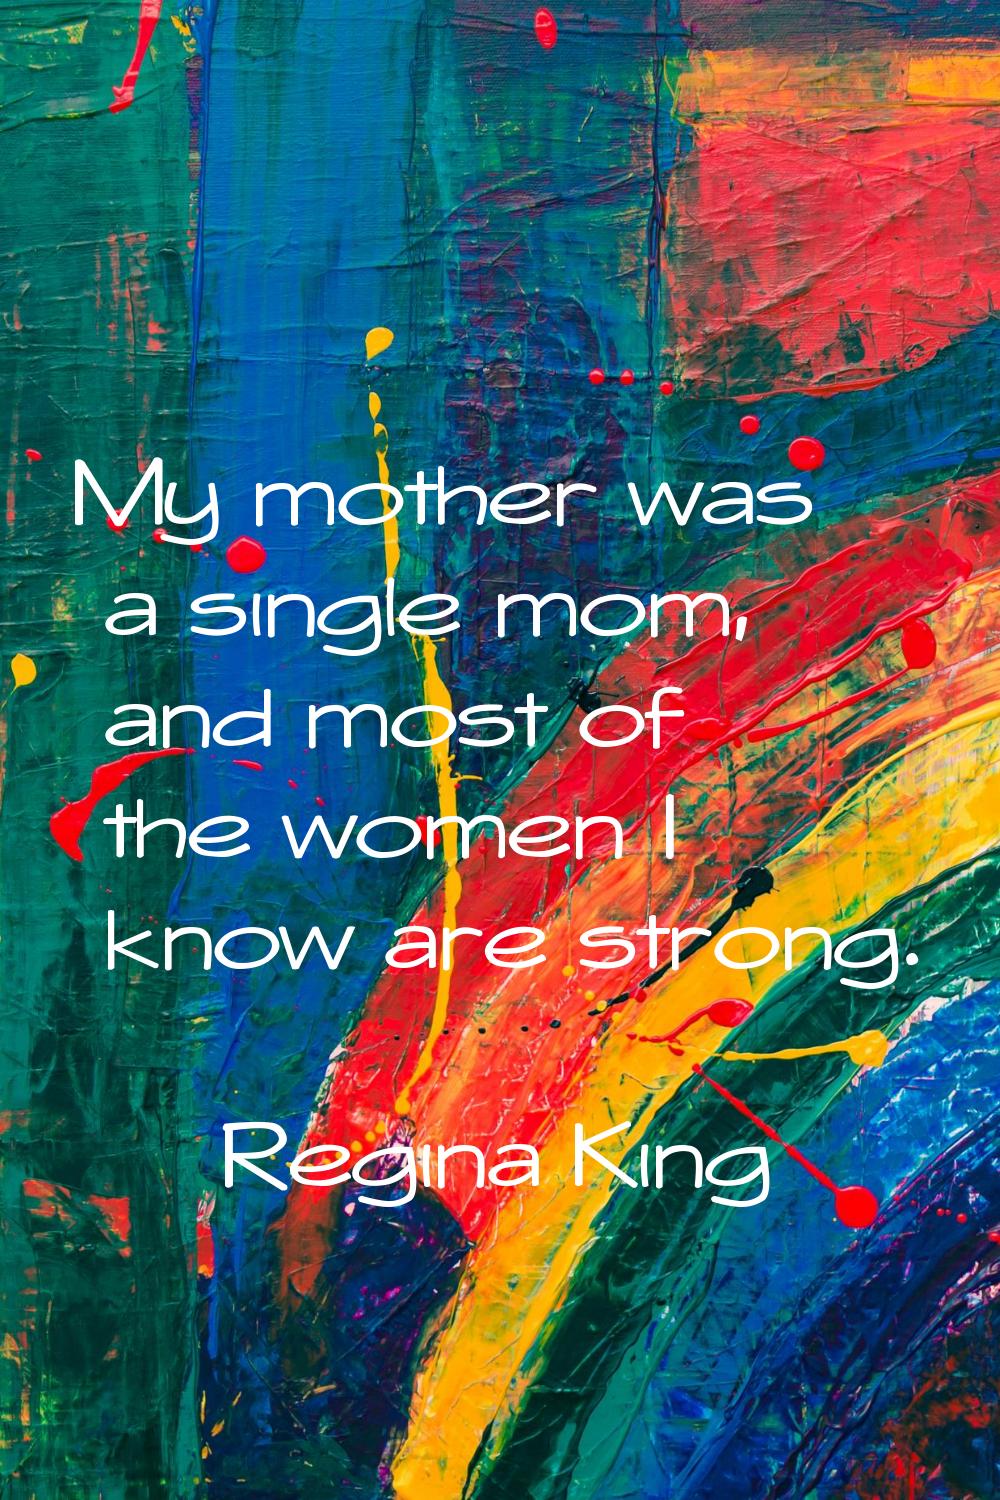 My mother was a single mom, and most of the women I know are strong.